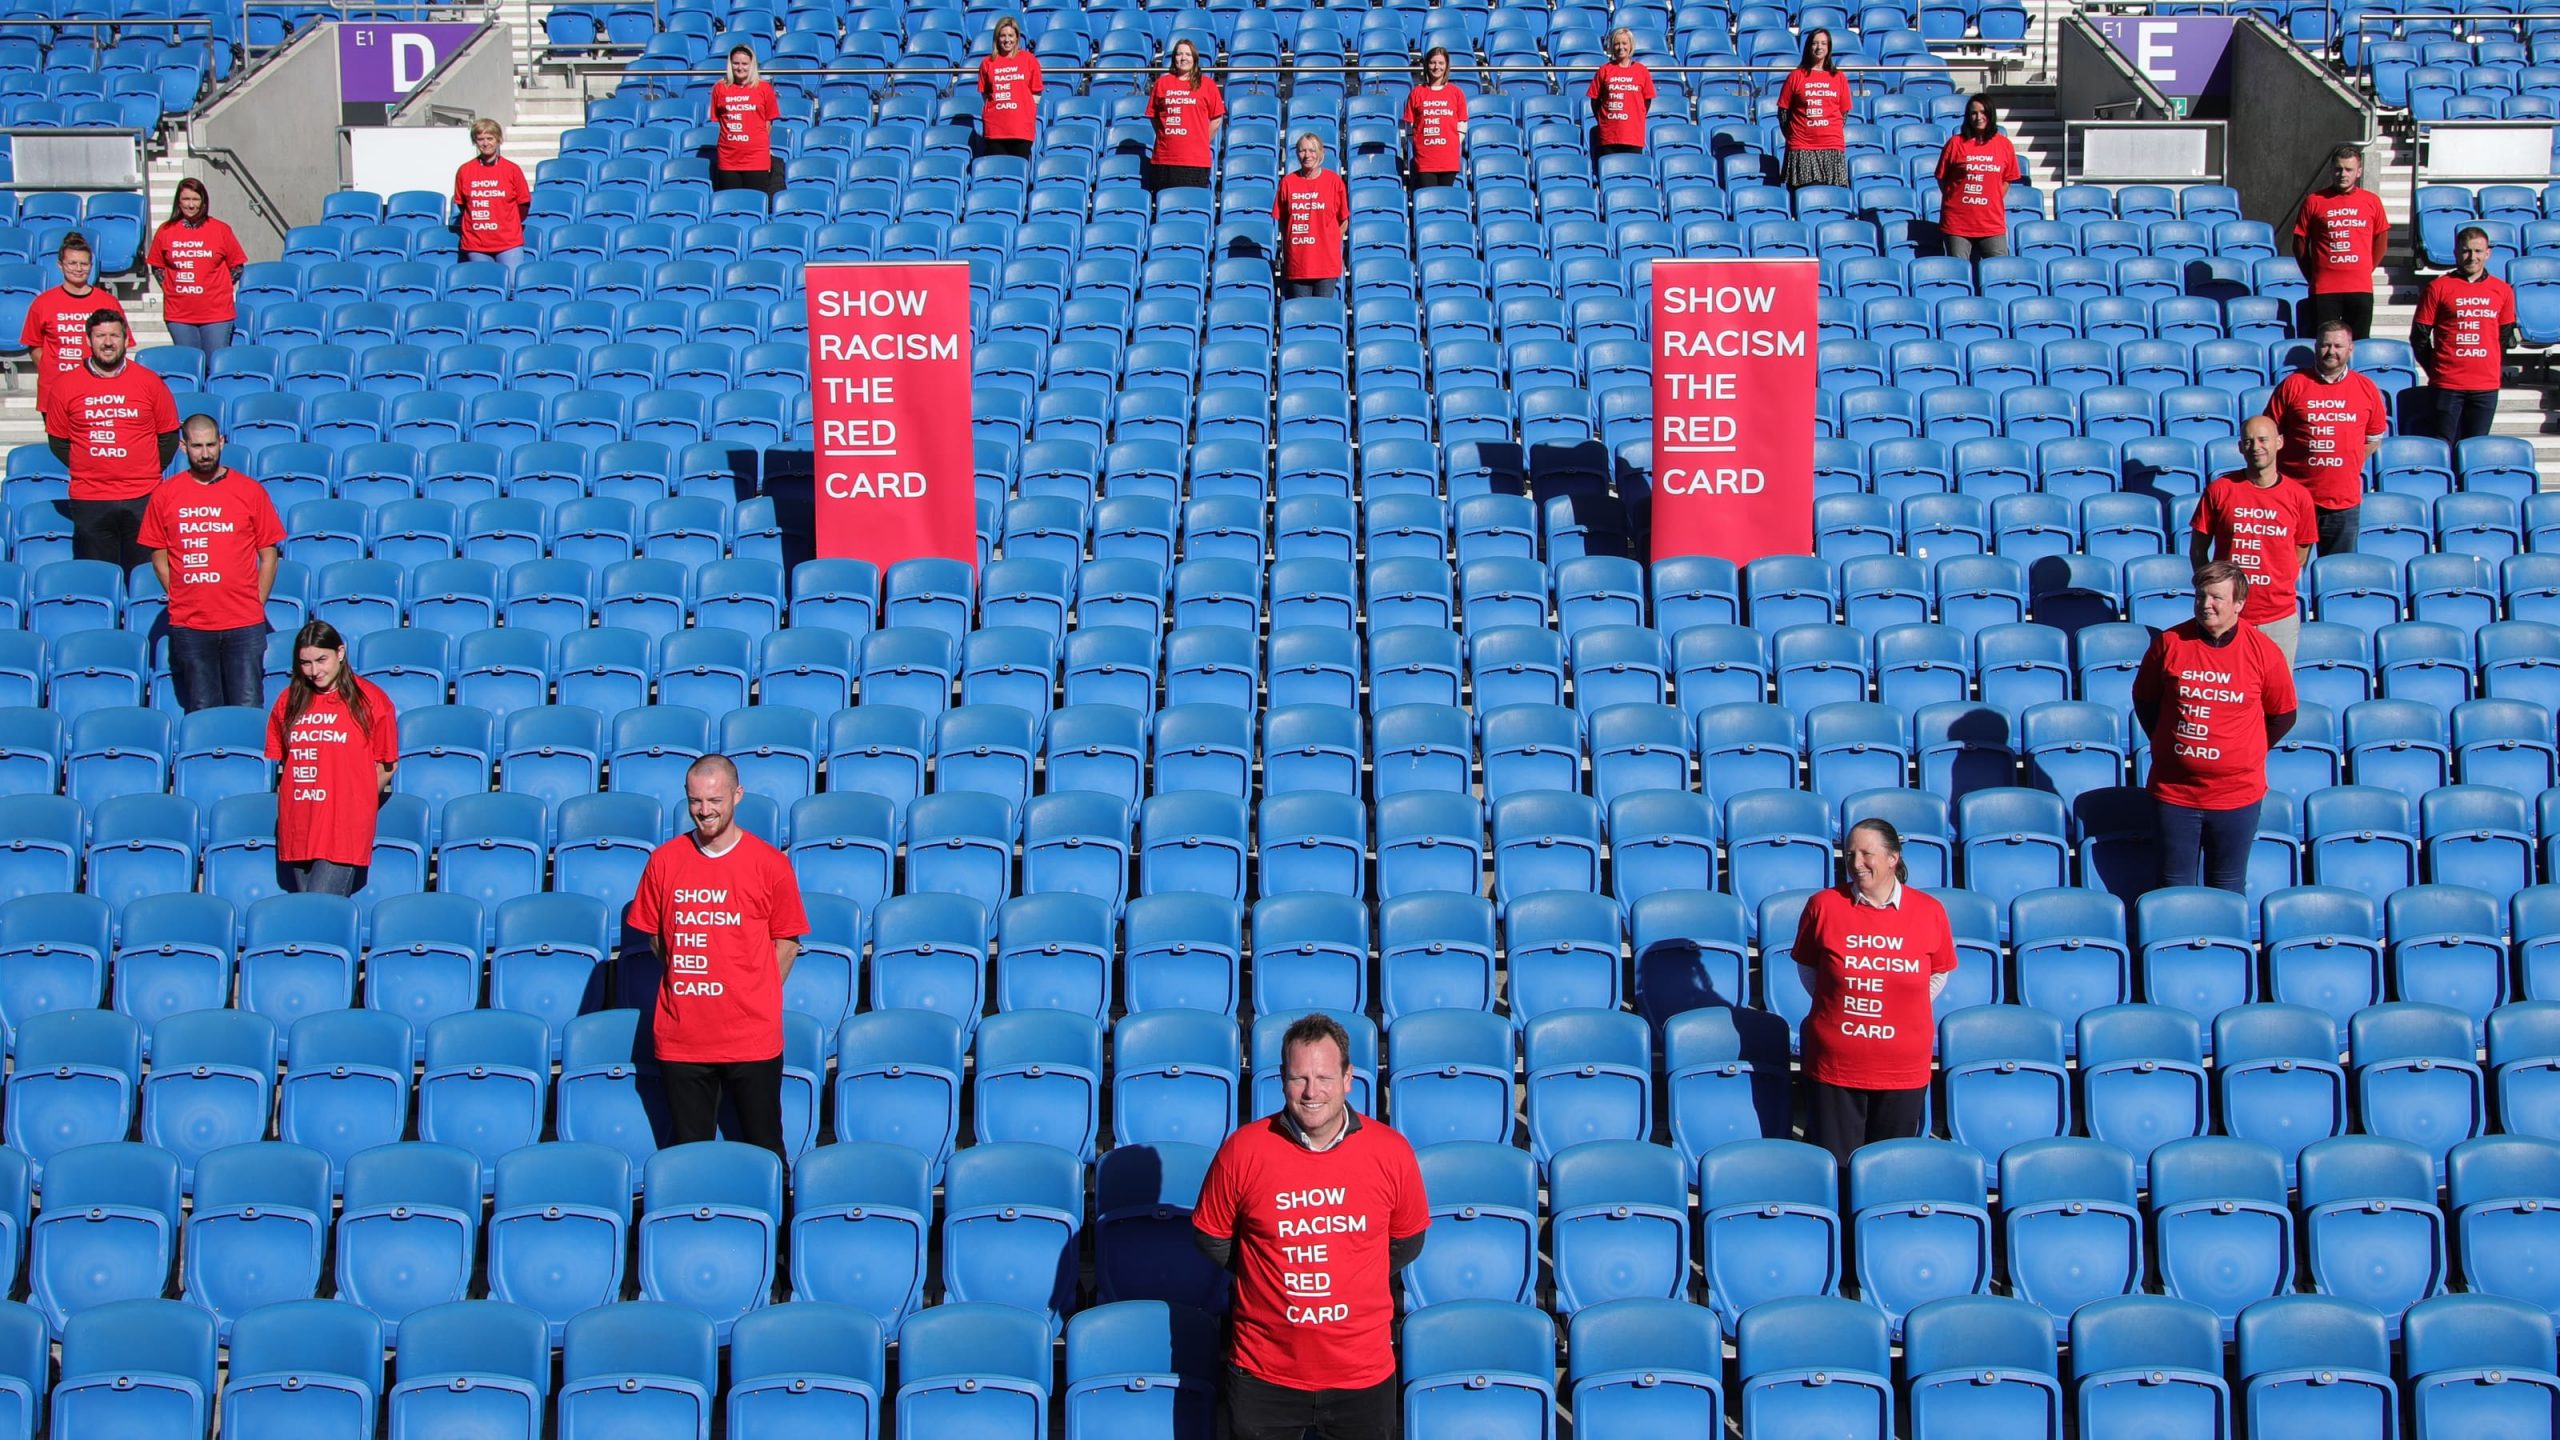 people in the stadium seats in a shape of heart